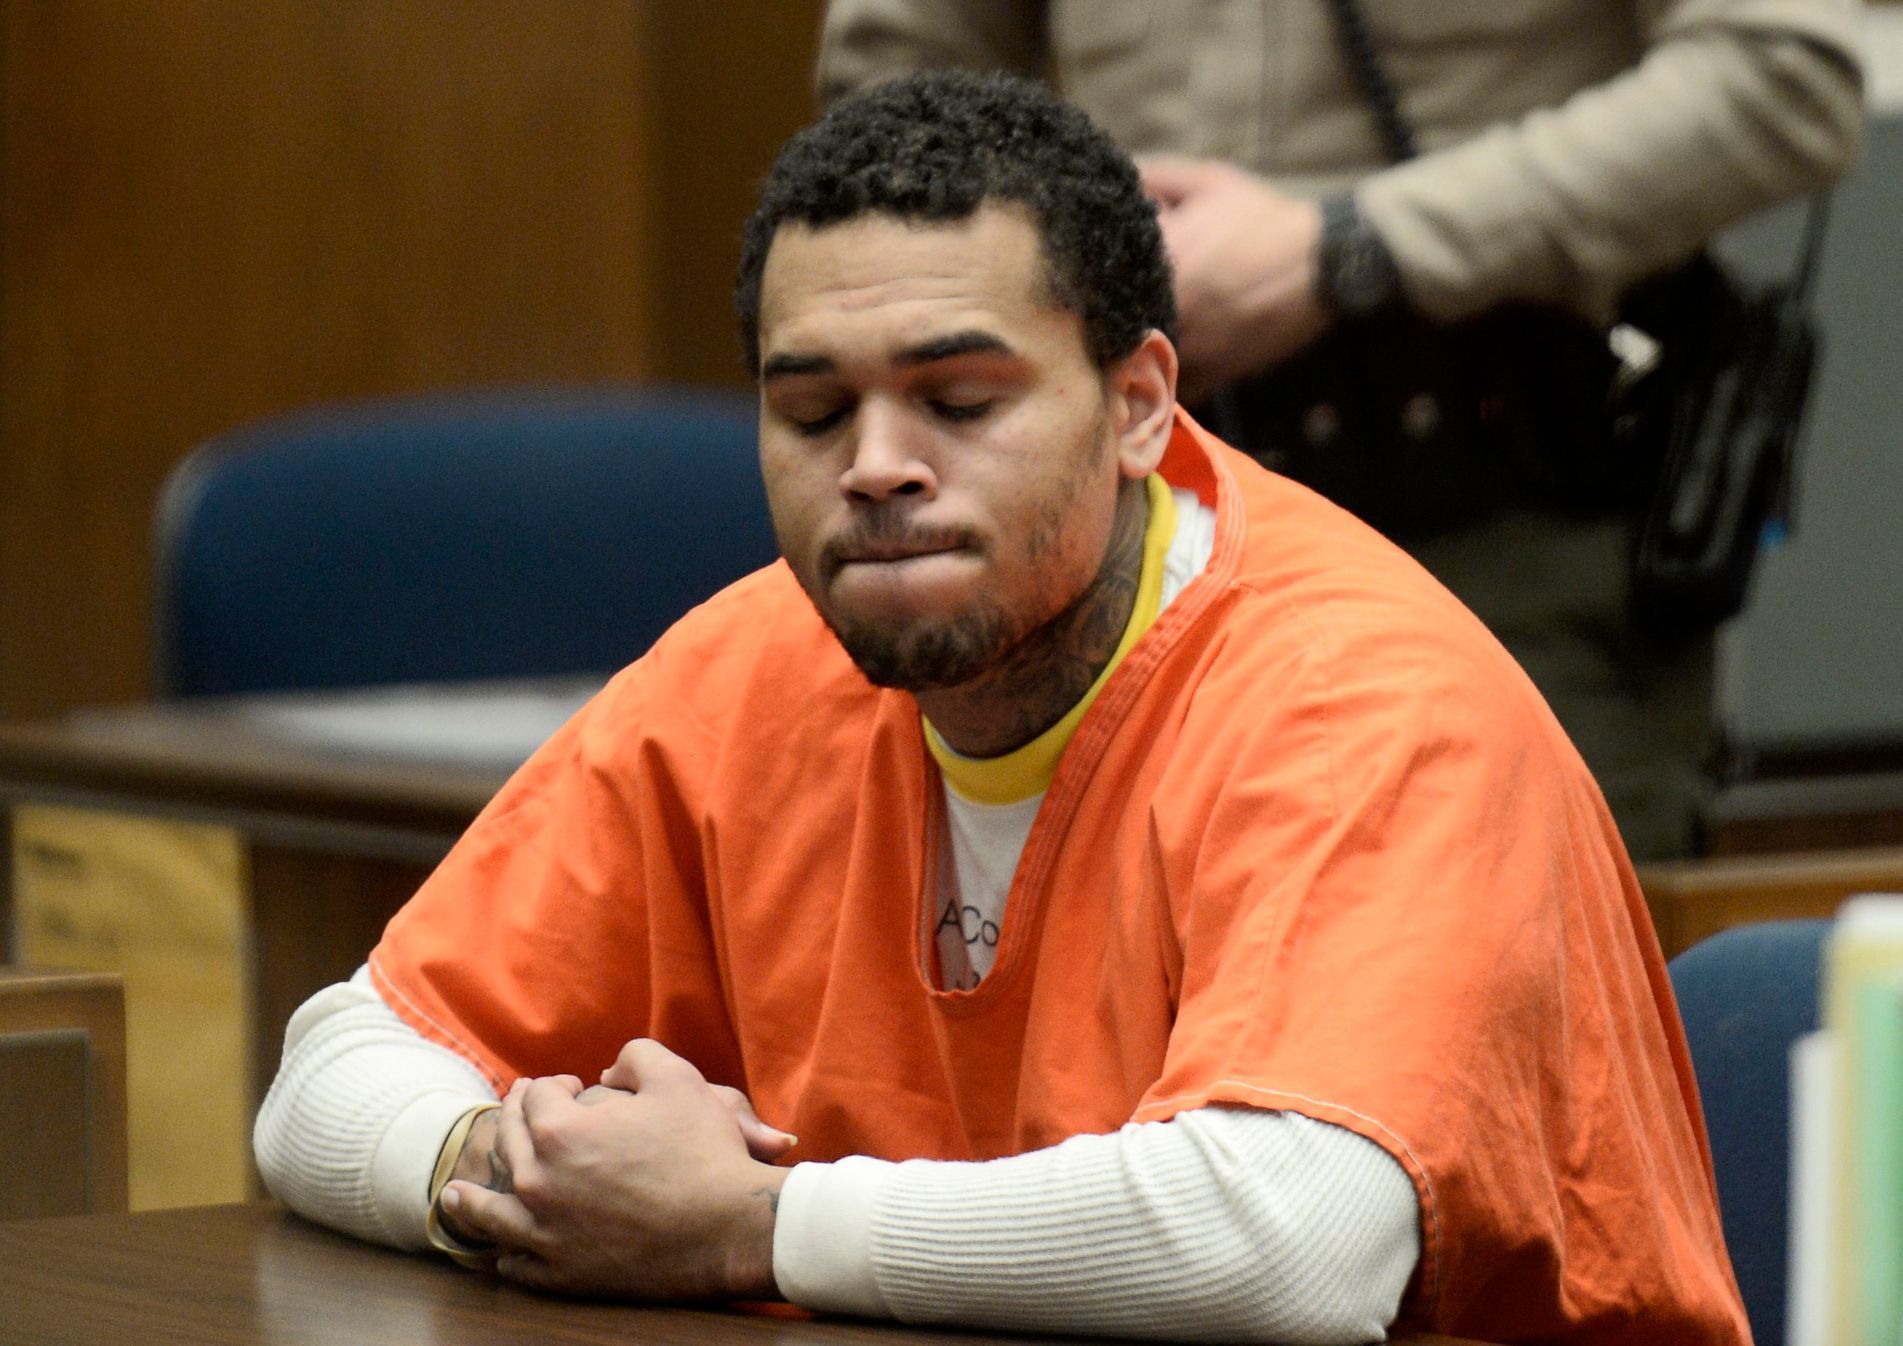 Chris Brown appears in court for a hearing at the Criminal Courts in Los Angeles